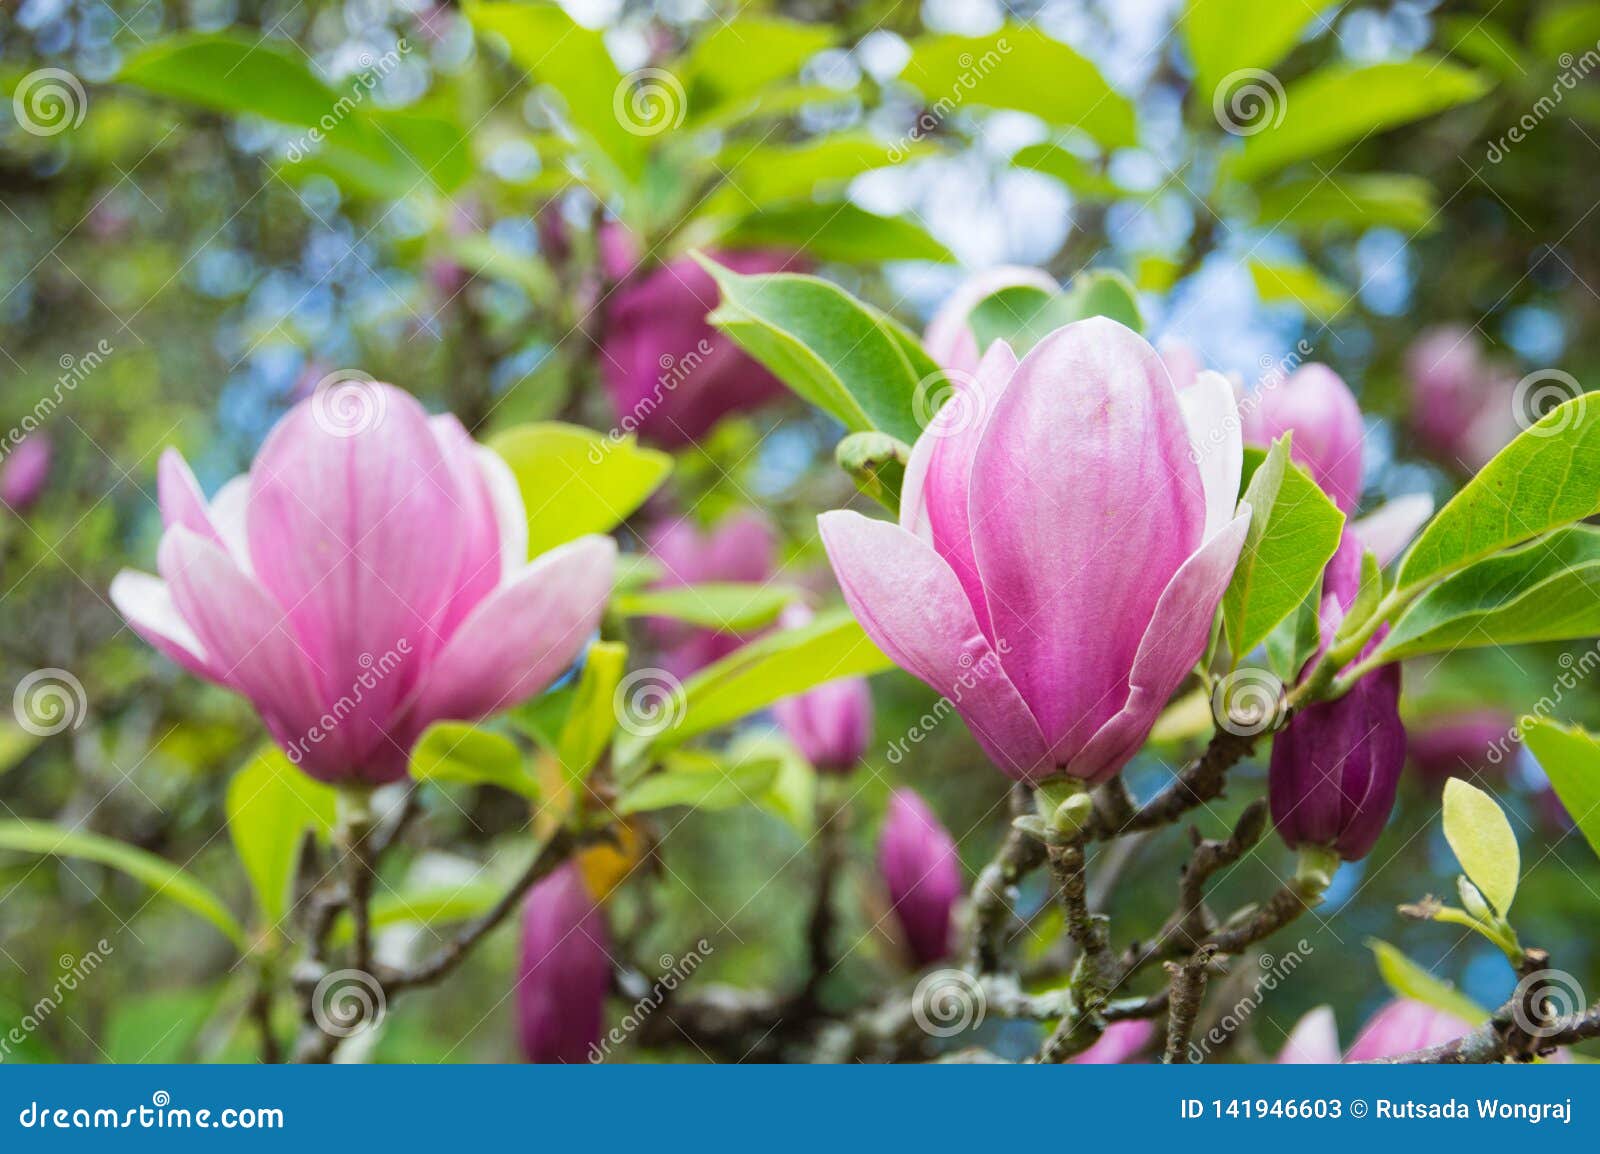 Pink Magnolia Flowers In The Garden Stock Image Image Of Blooming Beautiful 141946603